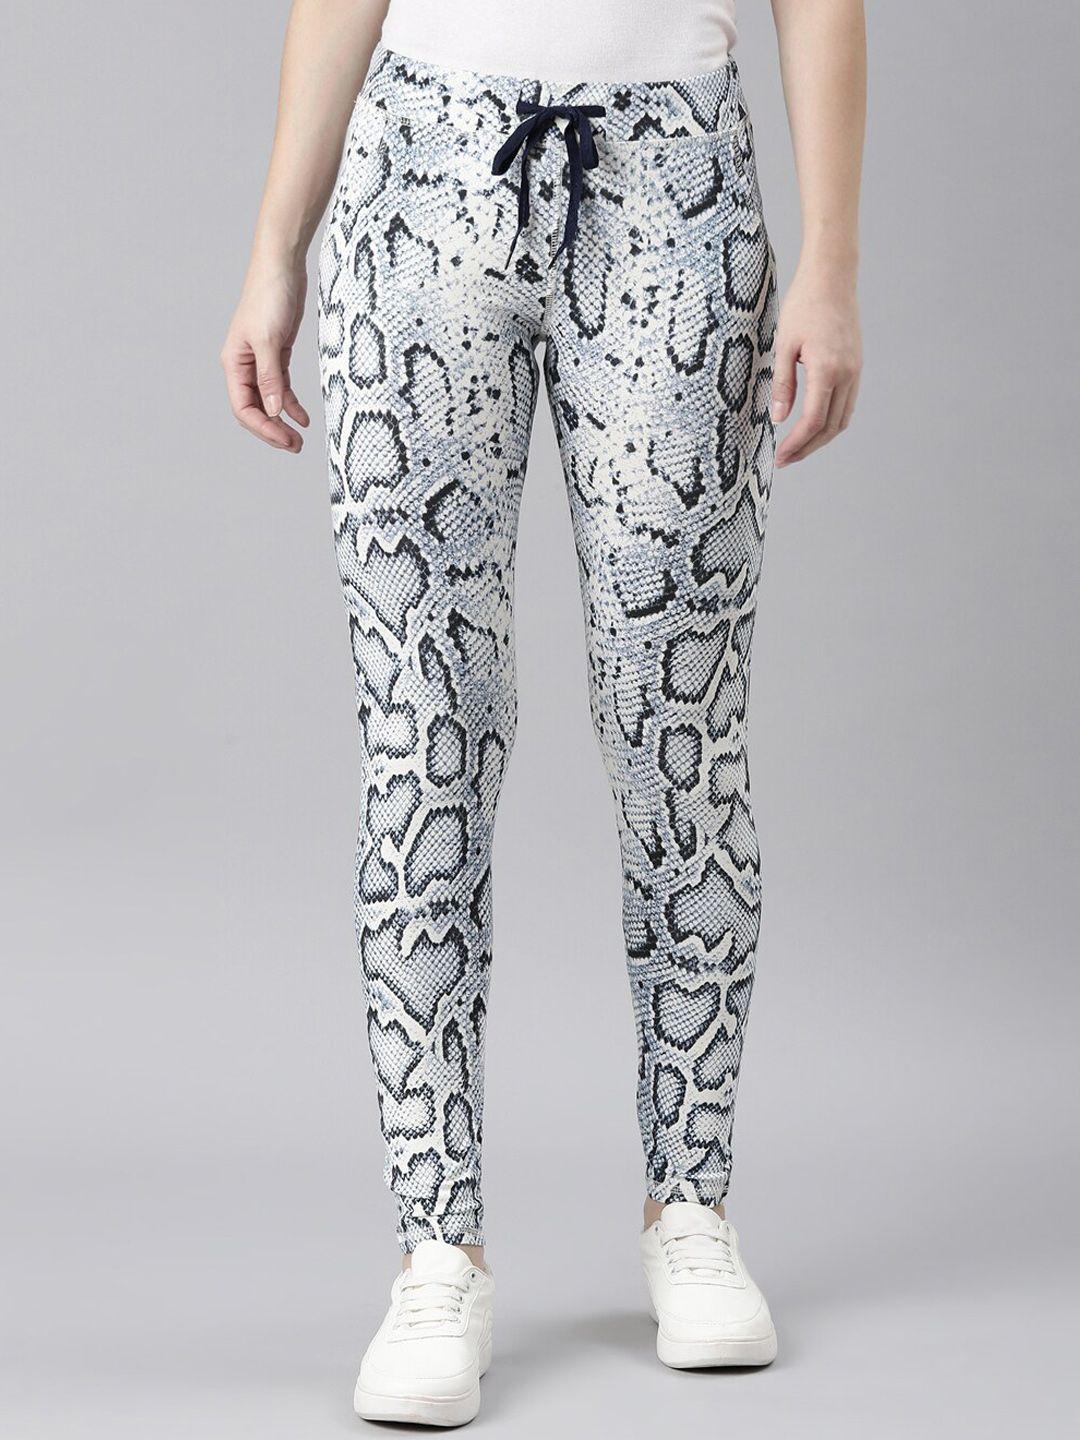 showoff-women-animal-textured-stretchable-mid-rise-slim-fit-track-pant